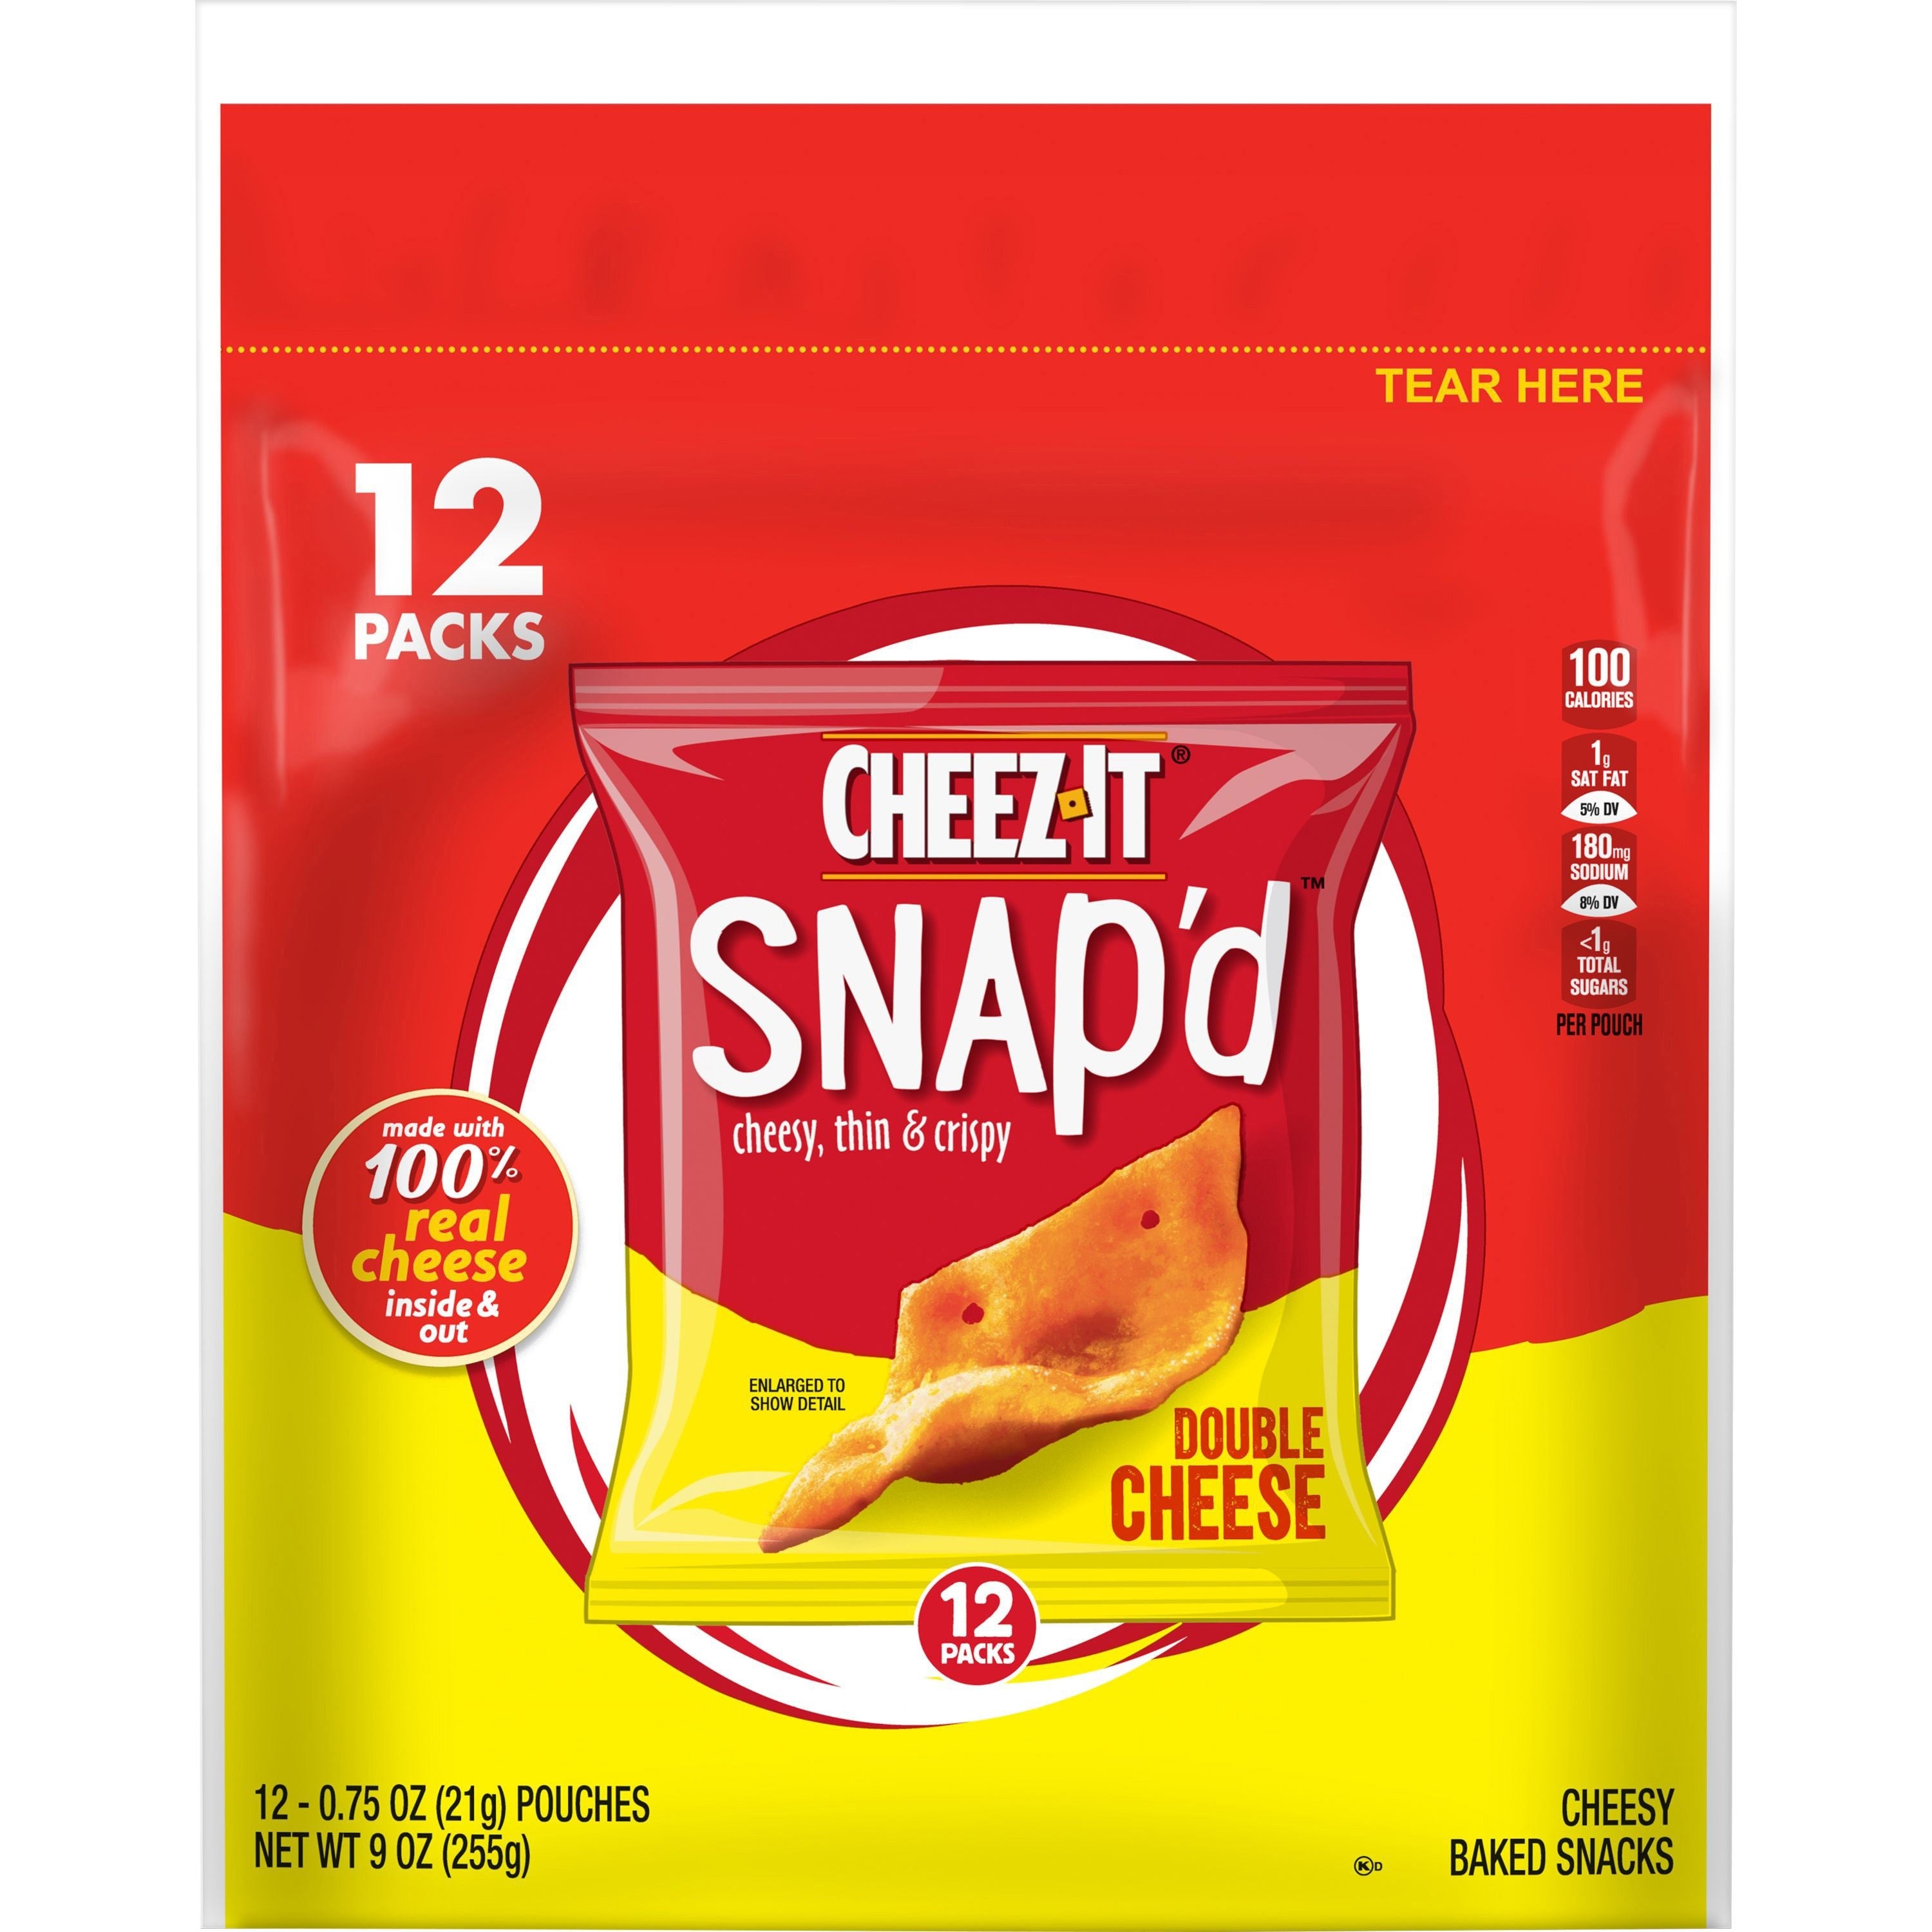 cheez-it-snapd-double-cheese-crackers-cheese-075-oz-12-box_keb11924 - 2